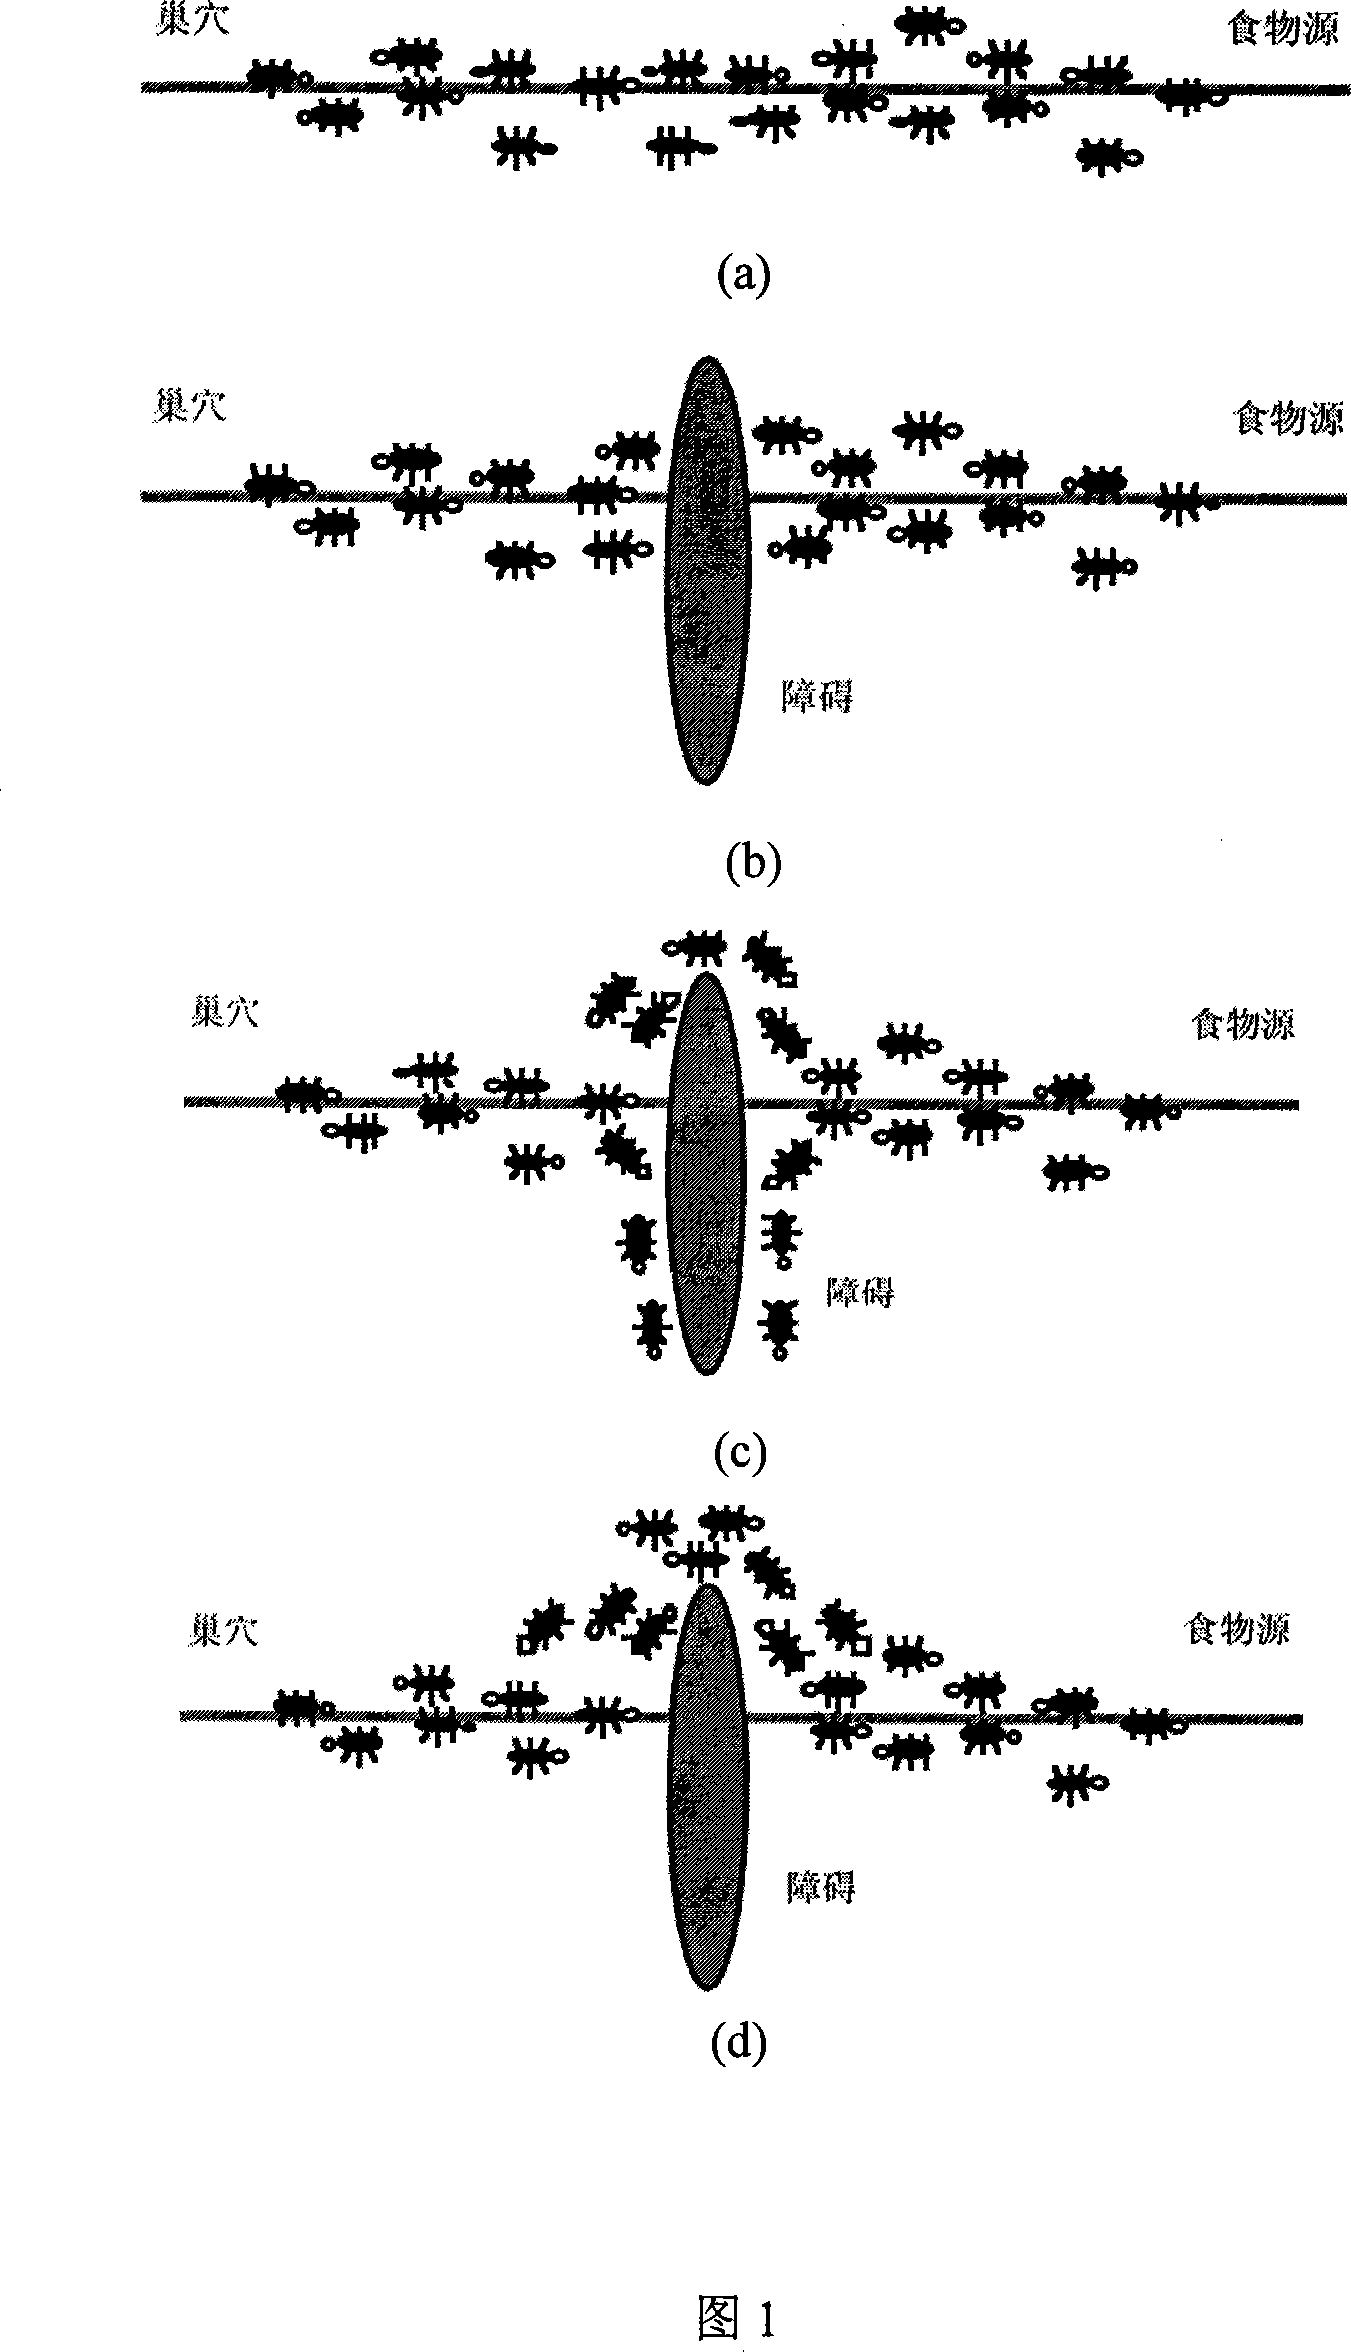 Method for identifying high accuracy servo system friction parameter by using ant colony algorithm